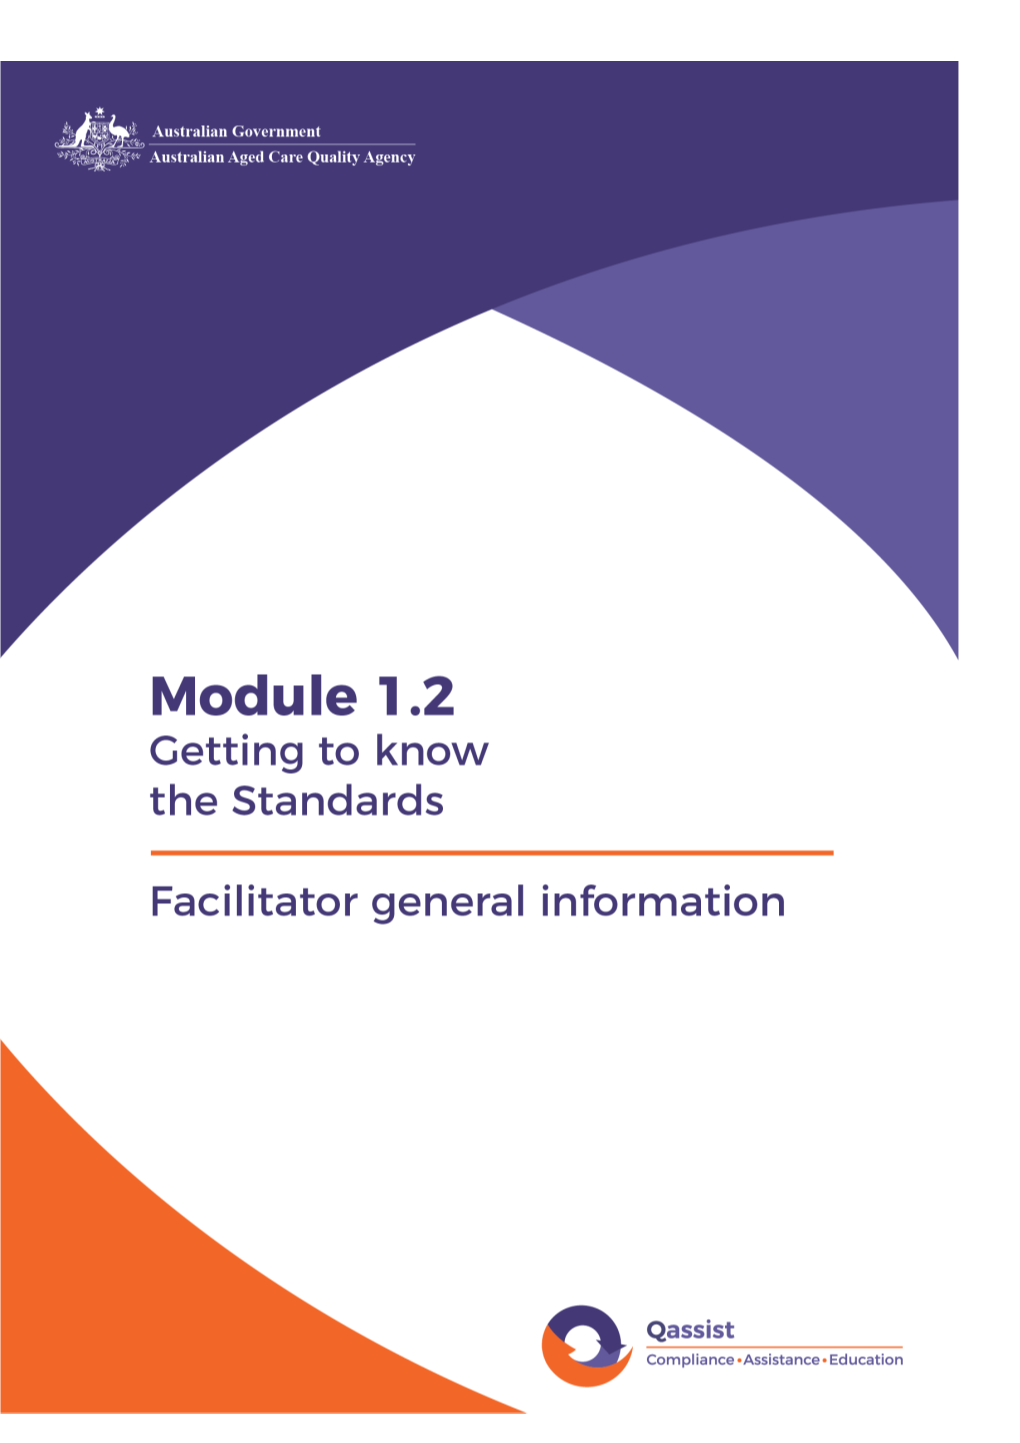 Module 1.2 Getting to Know the Standards - Facilitator General Information